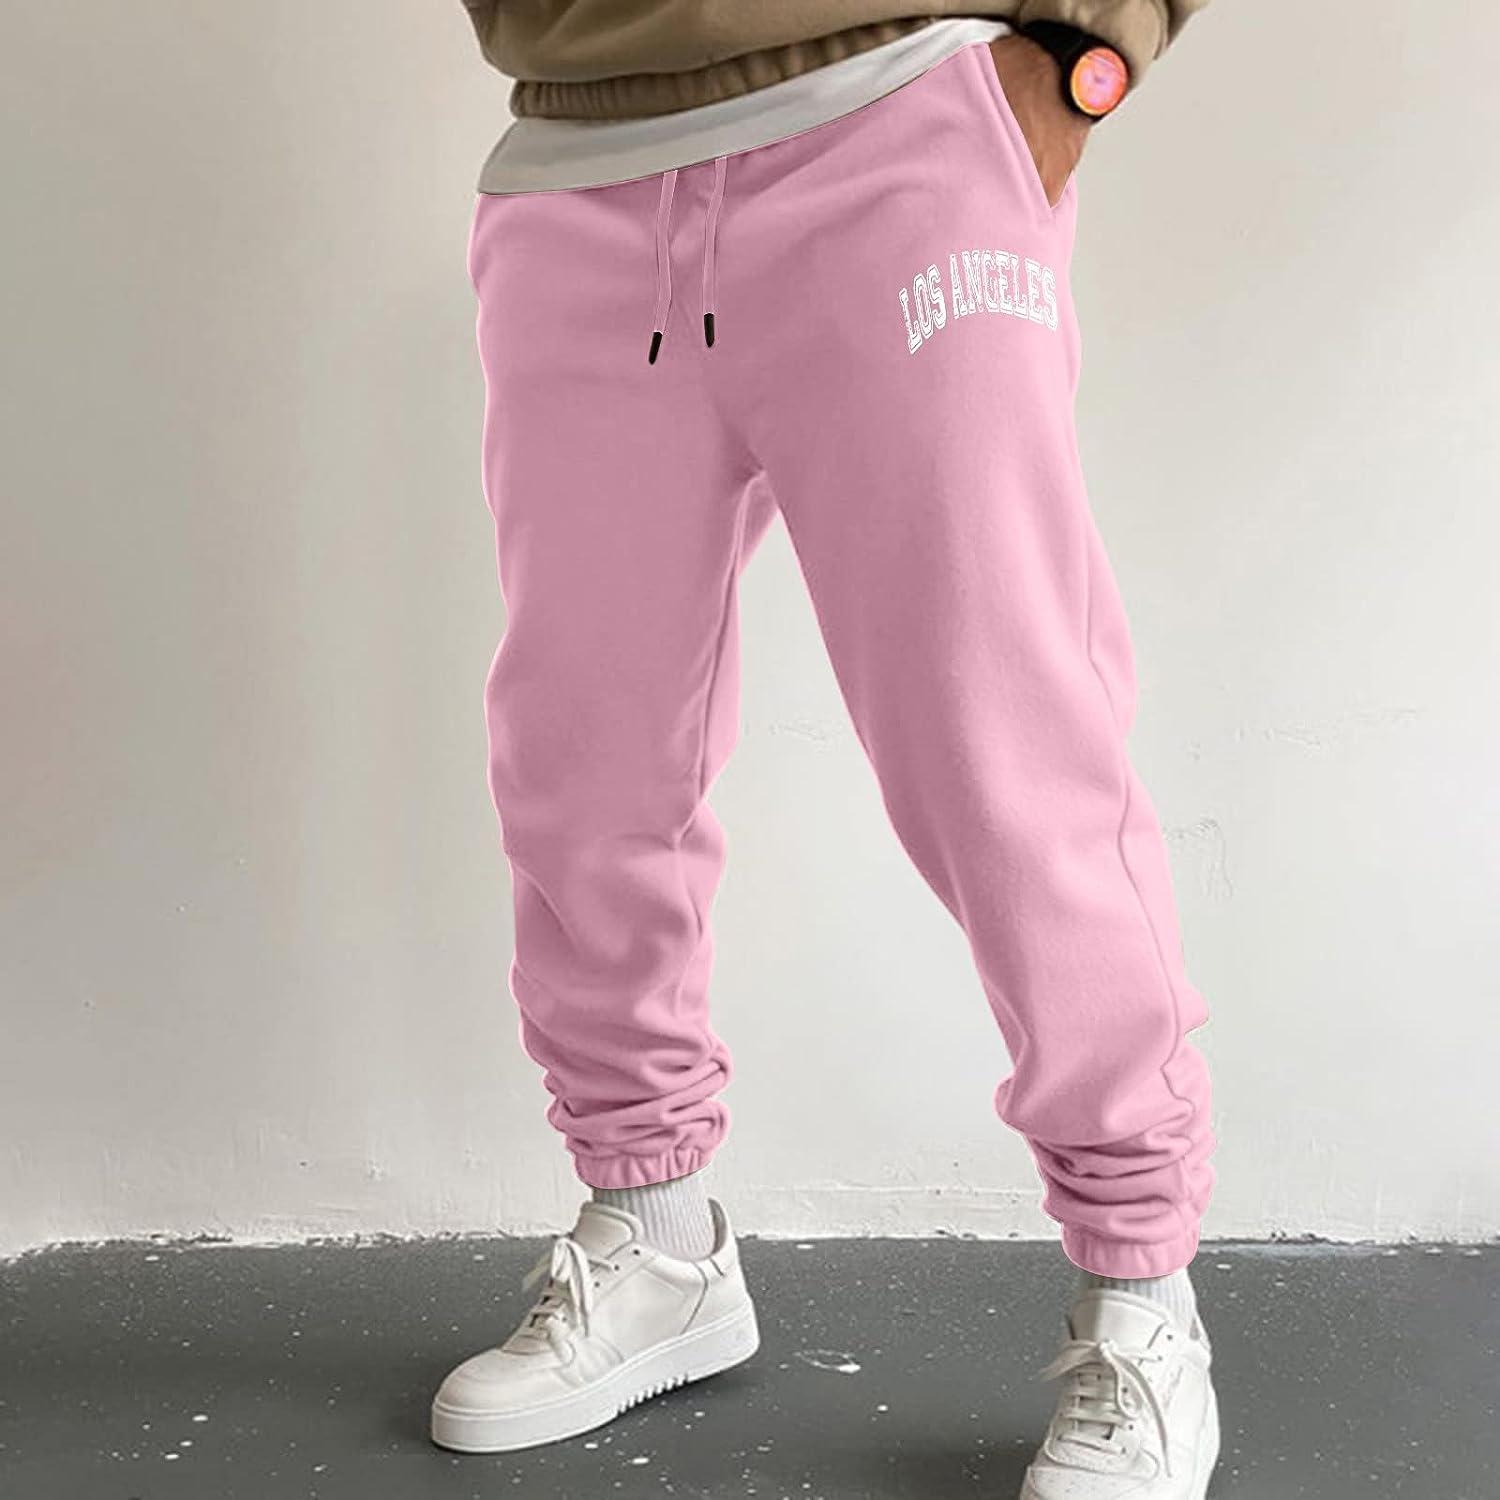 JUNGE Cargo Sweatpants for Men Elastic Waist Drawstring Athletic Pants  Casual Stretch Baggy Joggers Trousers with Pockets Medium #116-pink